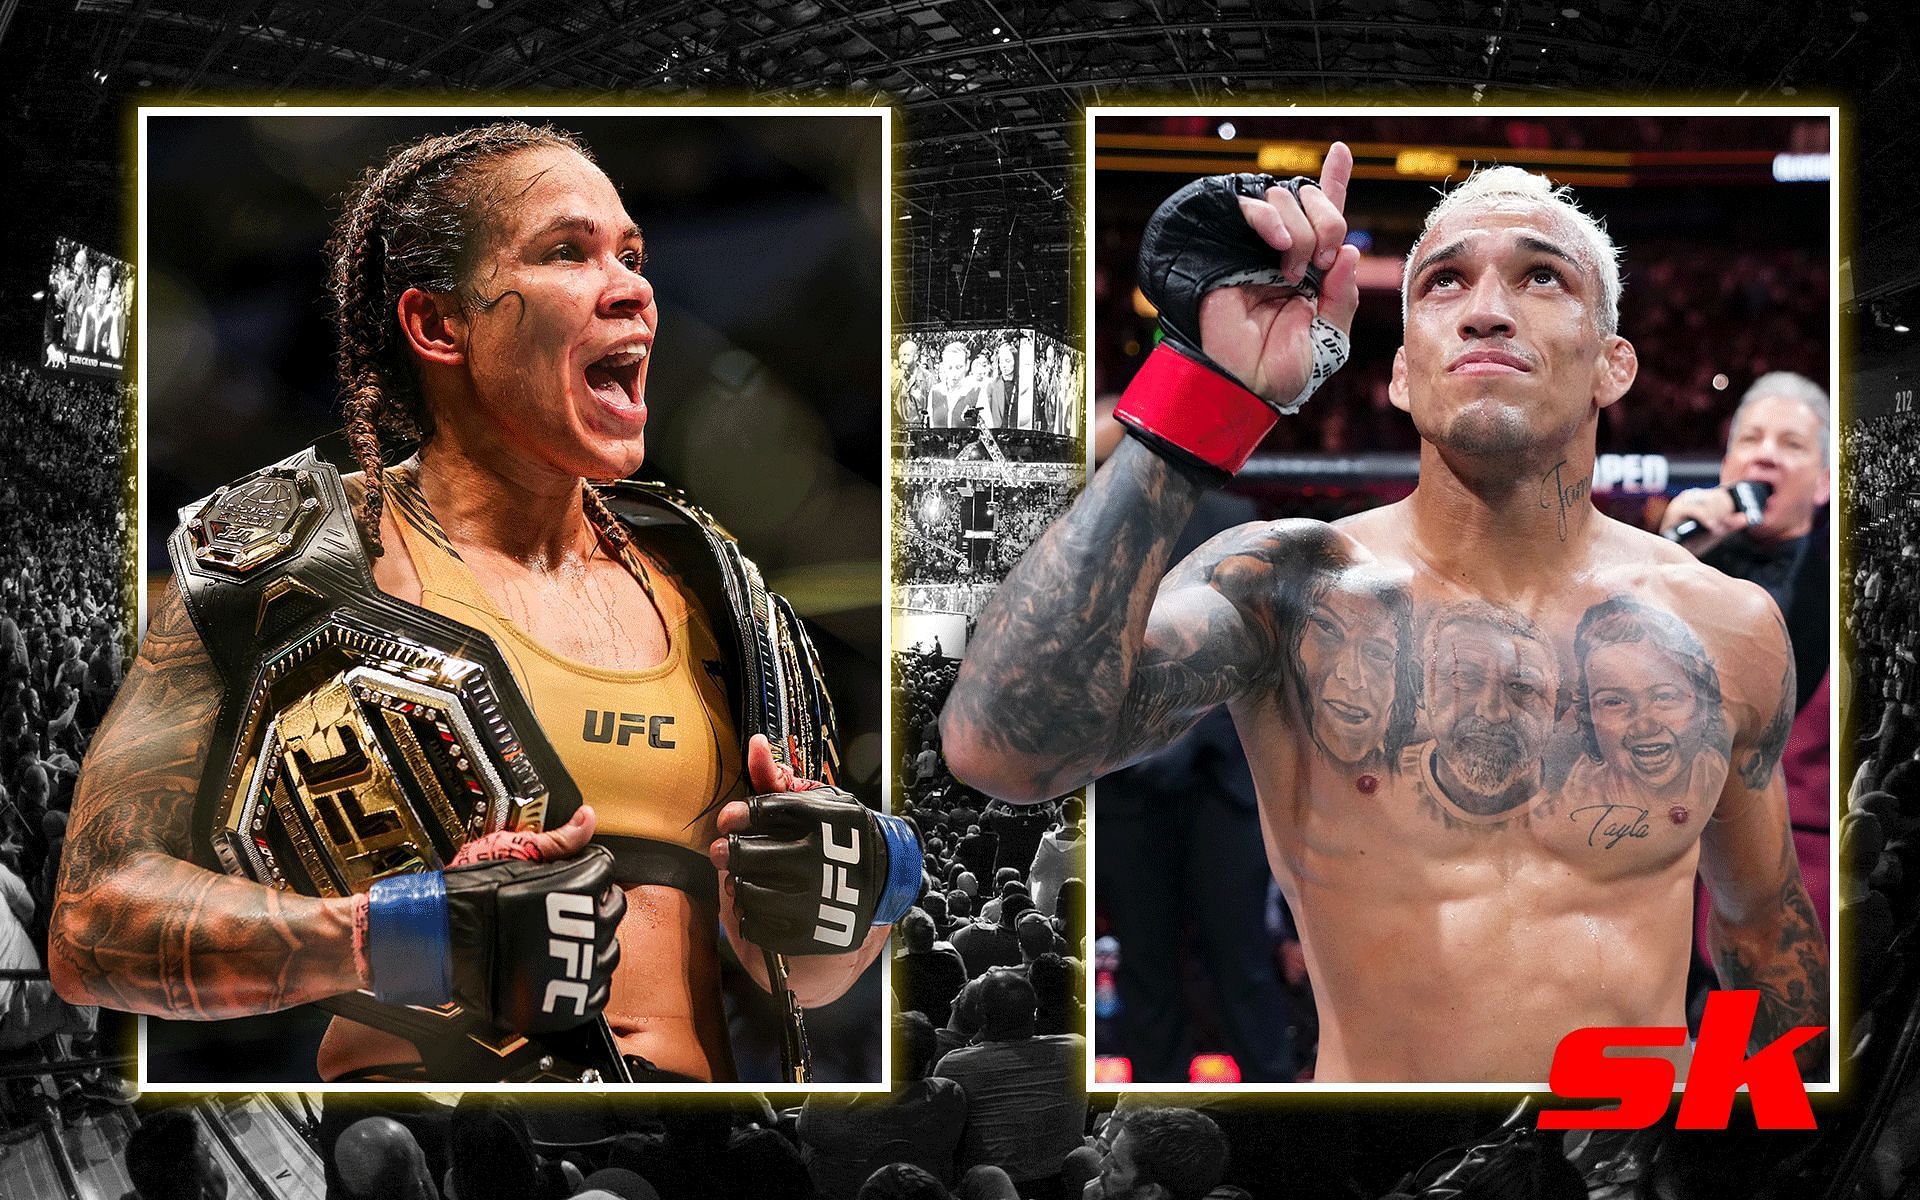 Amanda Nunes (left) and Charles Oliveira (right) [Image credits: @ufc on Twitter and Getty Images]